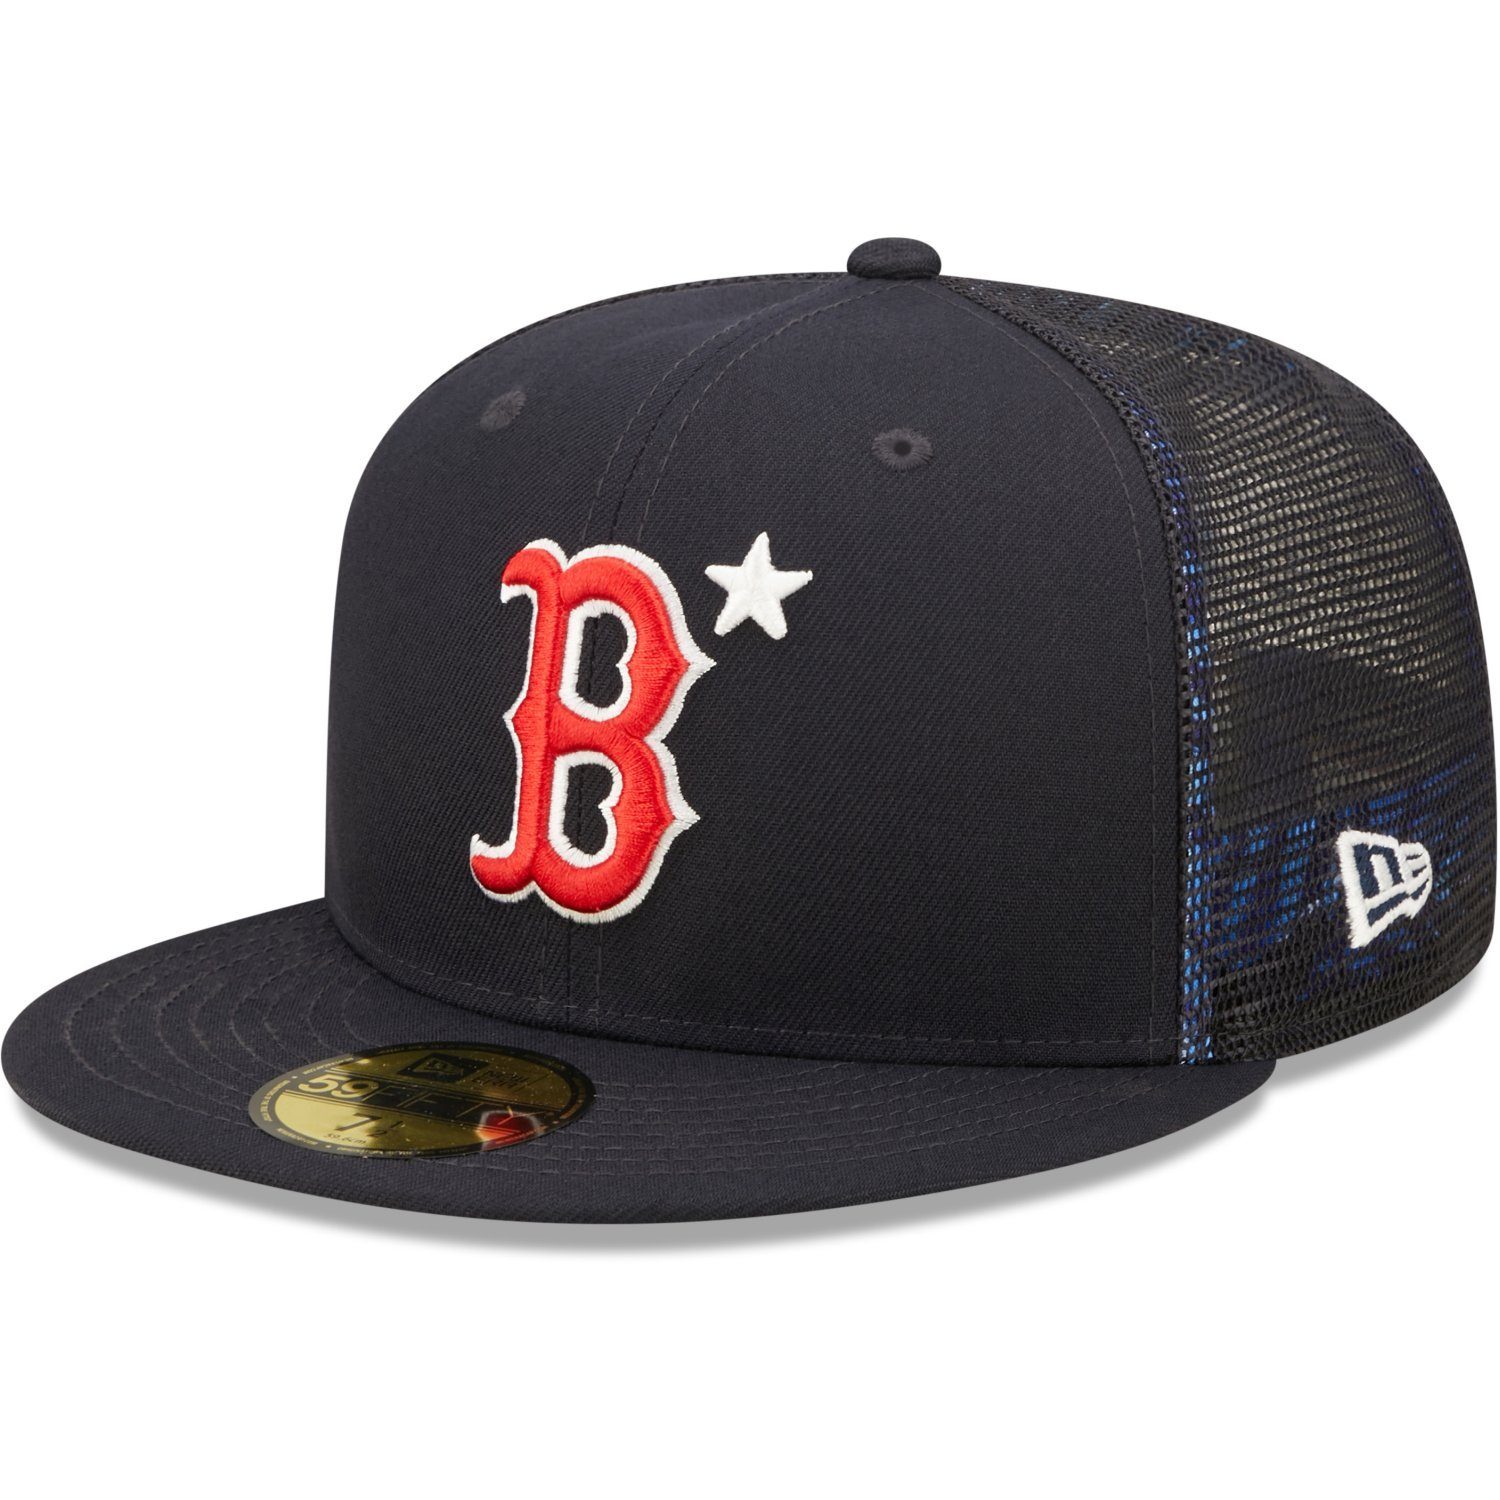 New Era 59Fifty GAME ALLSTAR Red Sox Cap Boston Fitted